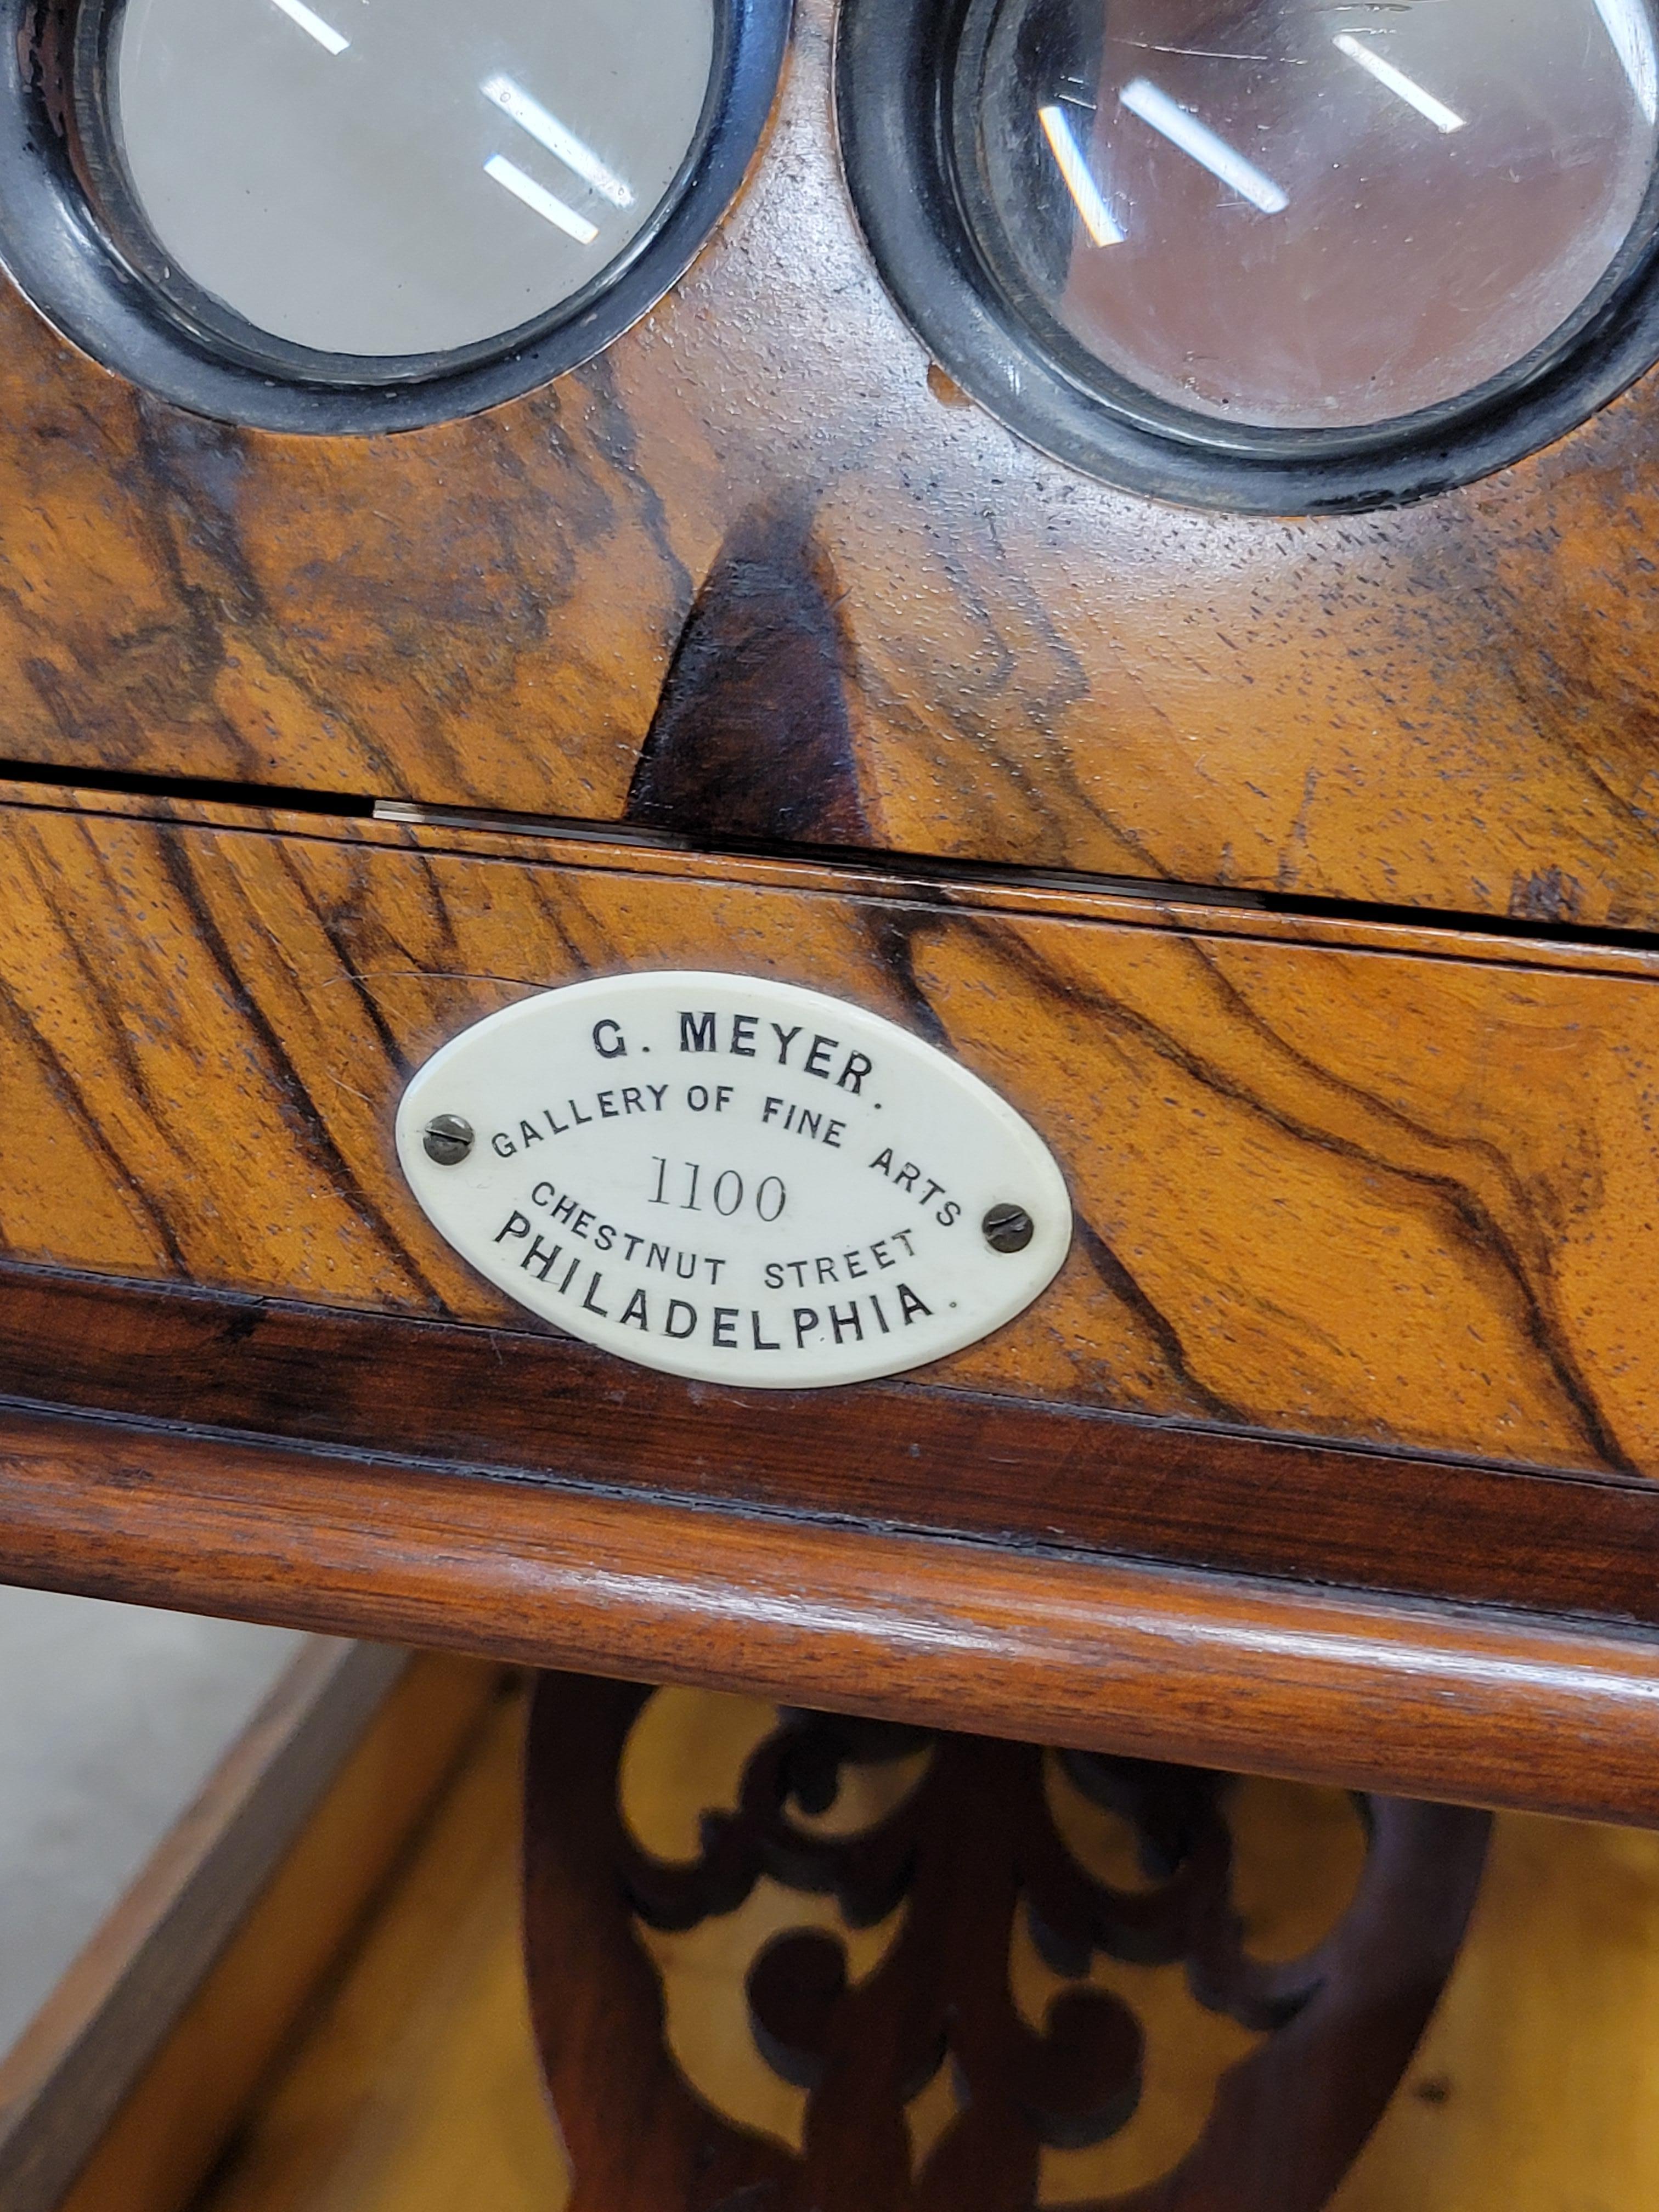 19th Century Antique Rosewood Folding Stereoscope Viewer - Philadelphia Gallery of Fine Arts For Sale